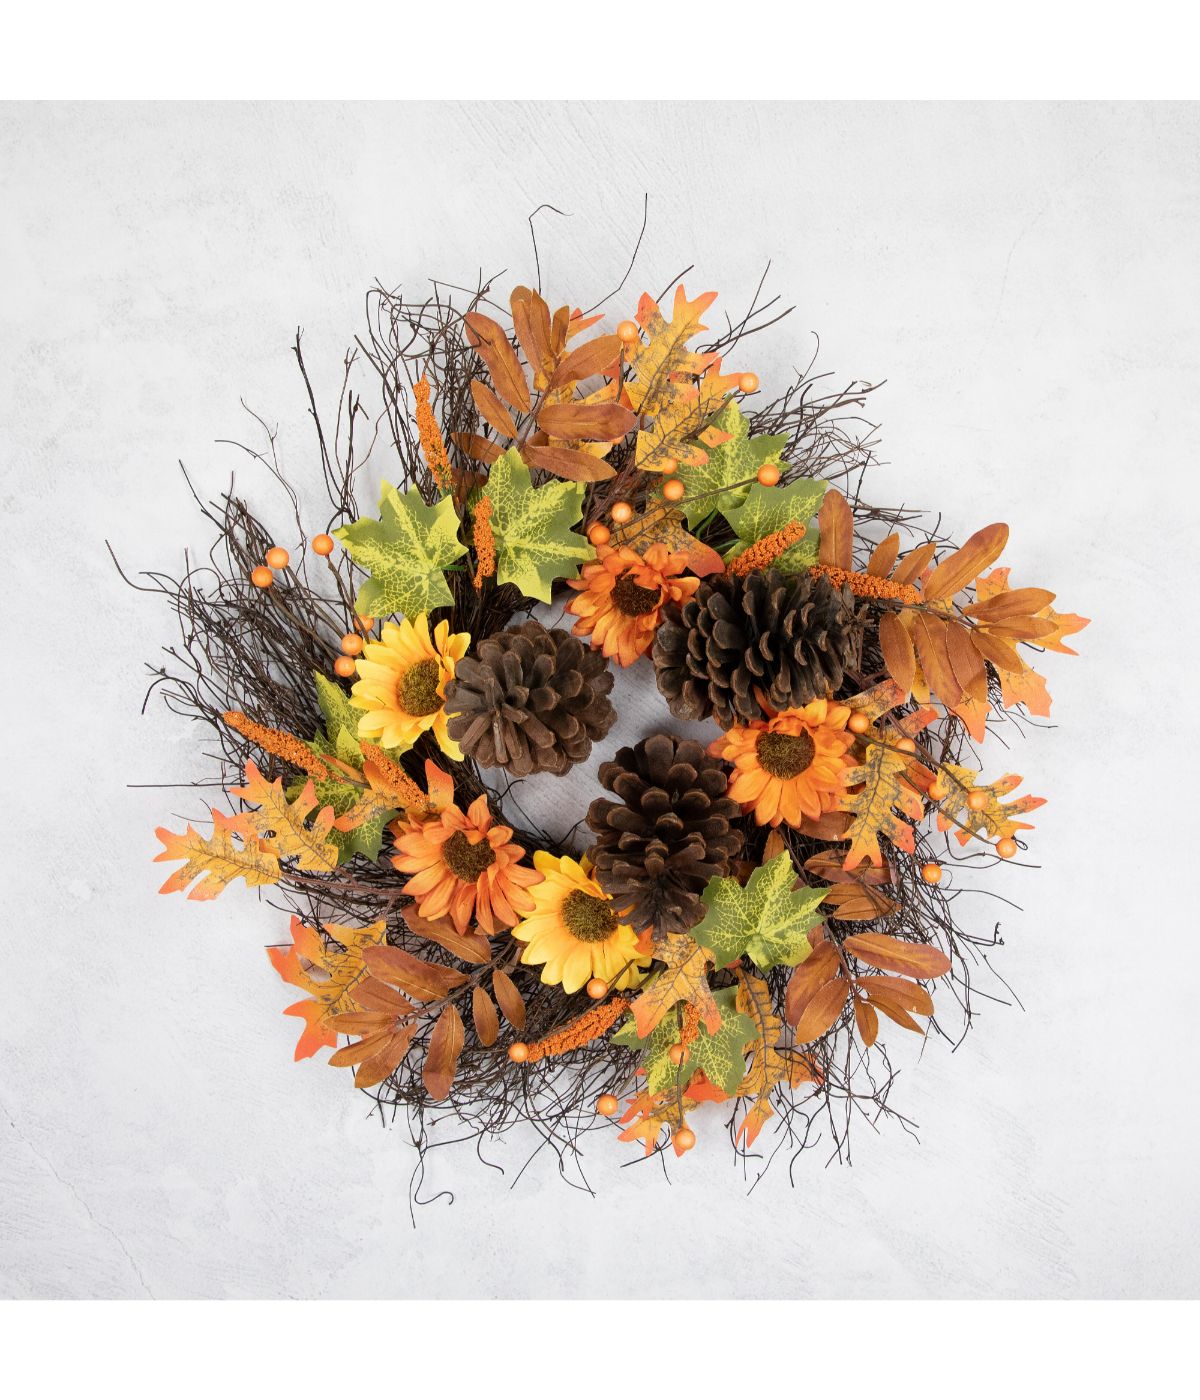 Sunflowers and Pine Cones Fall Artificial Thanksgiving Wreath Orange